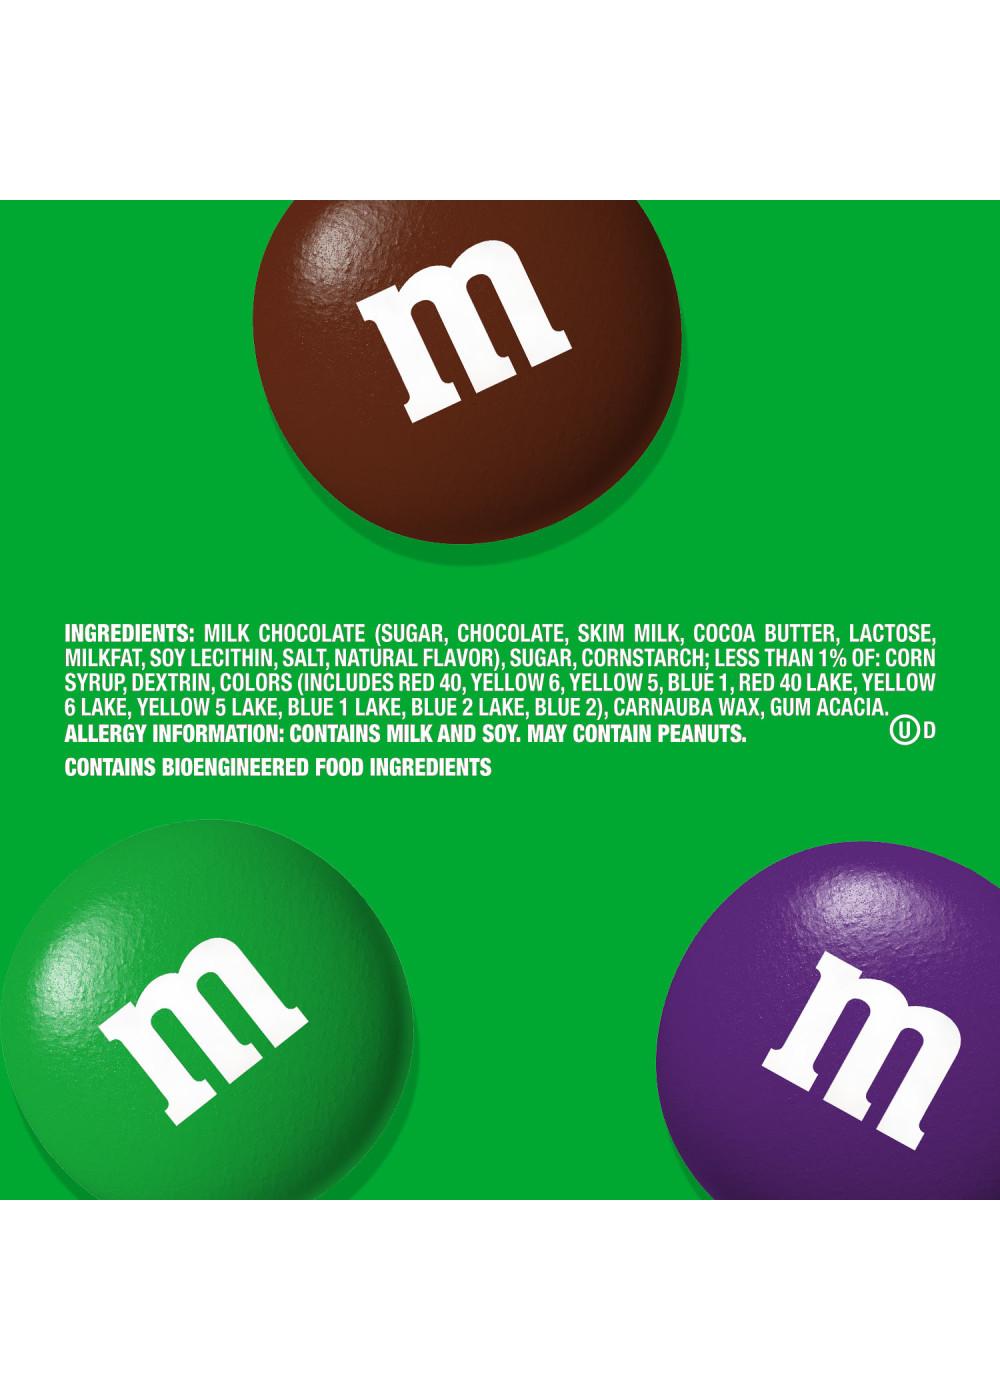 M&M'S MILK CHOCOLATE PARTY SIZE STAND UP POUCH PURPLE MOMENT 32